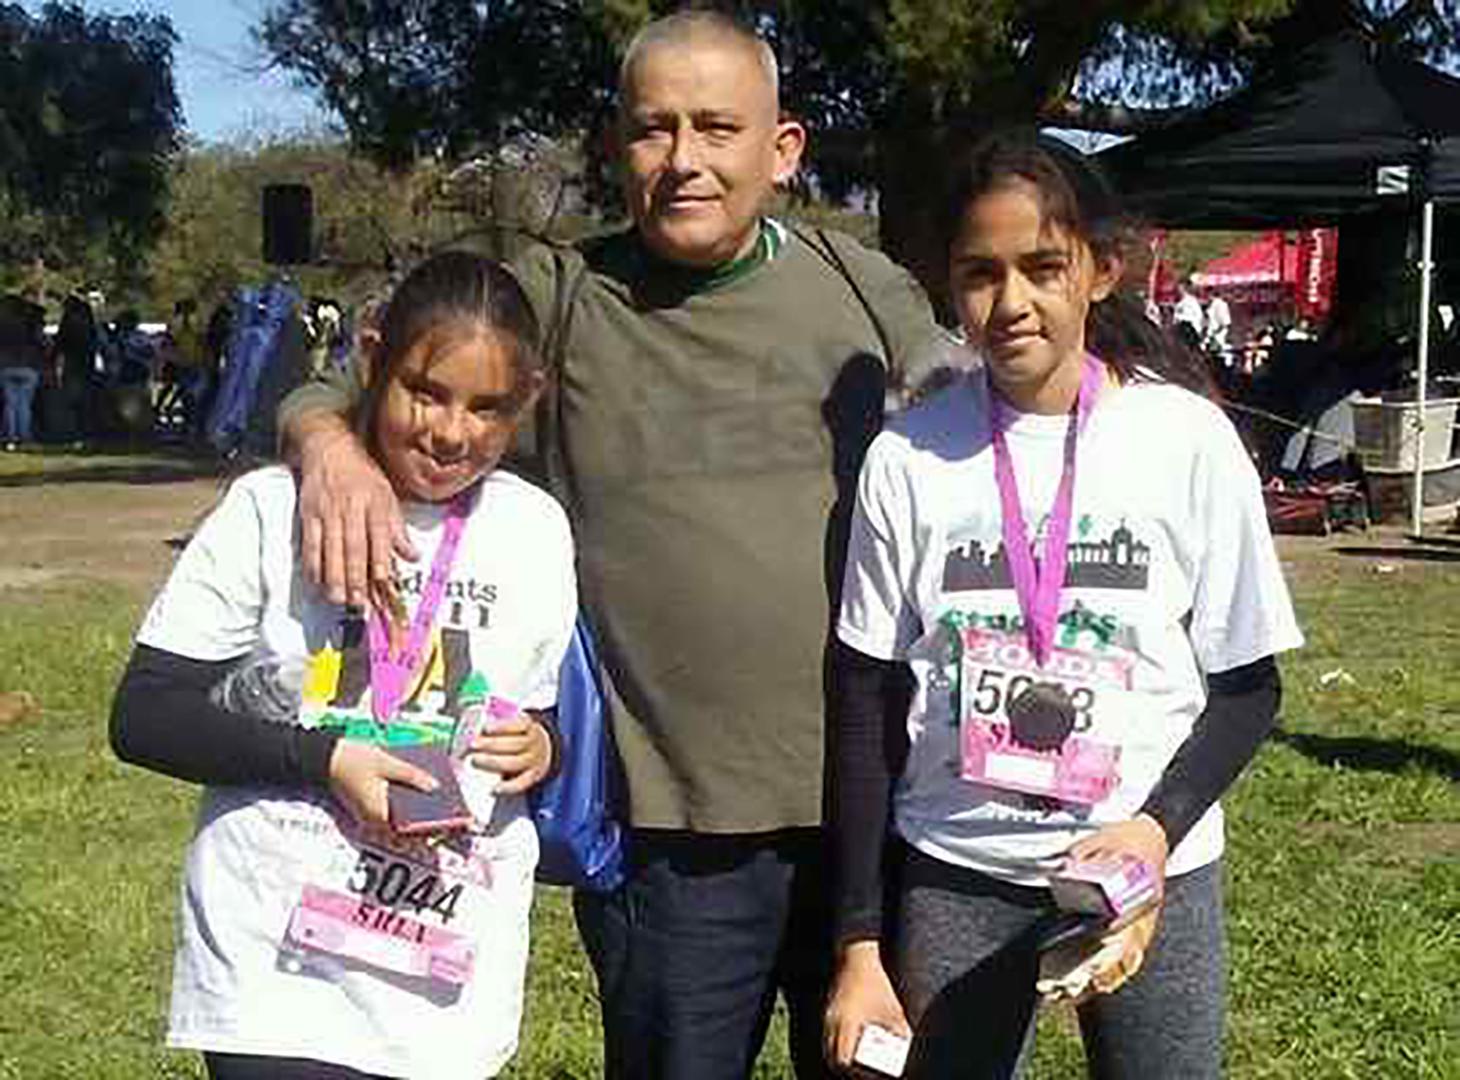 Romulo Avelica Gonzalez with his daughters. Image courtesy of the National Day Laborer Organizing Network